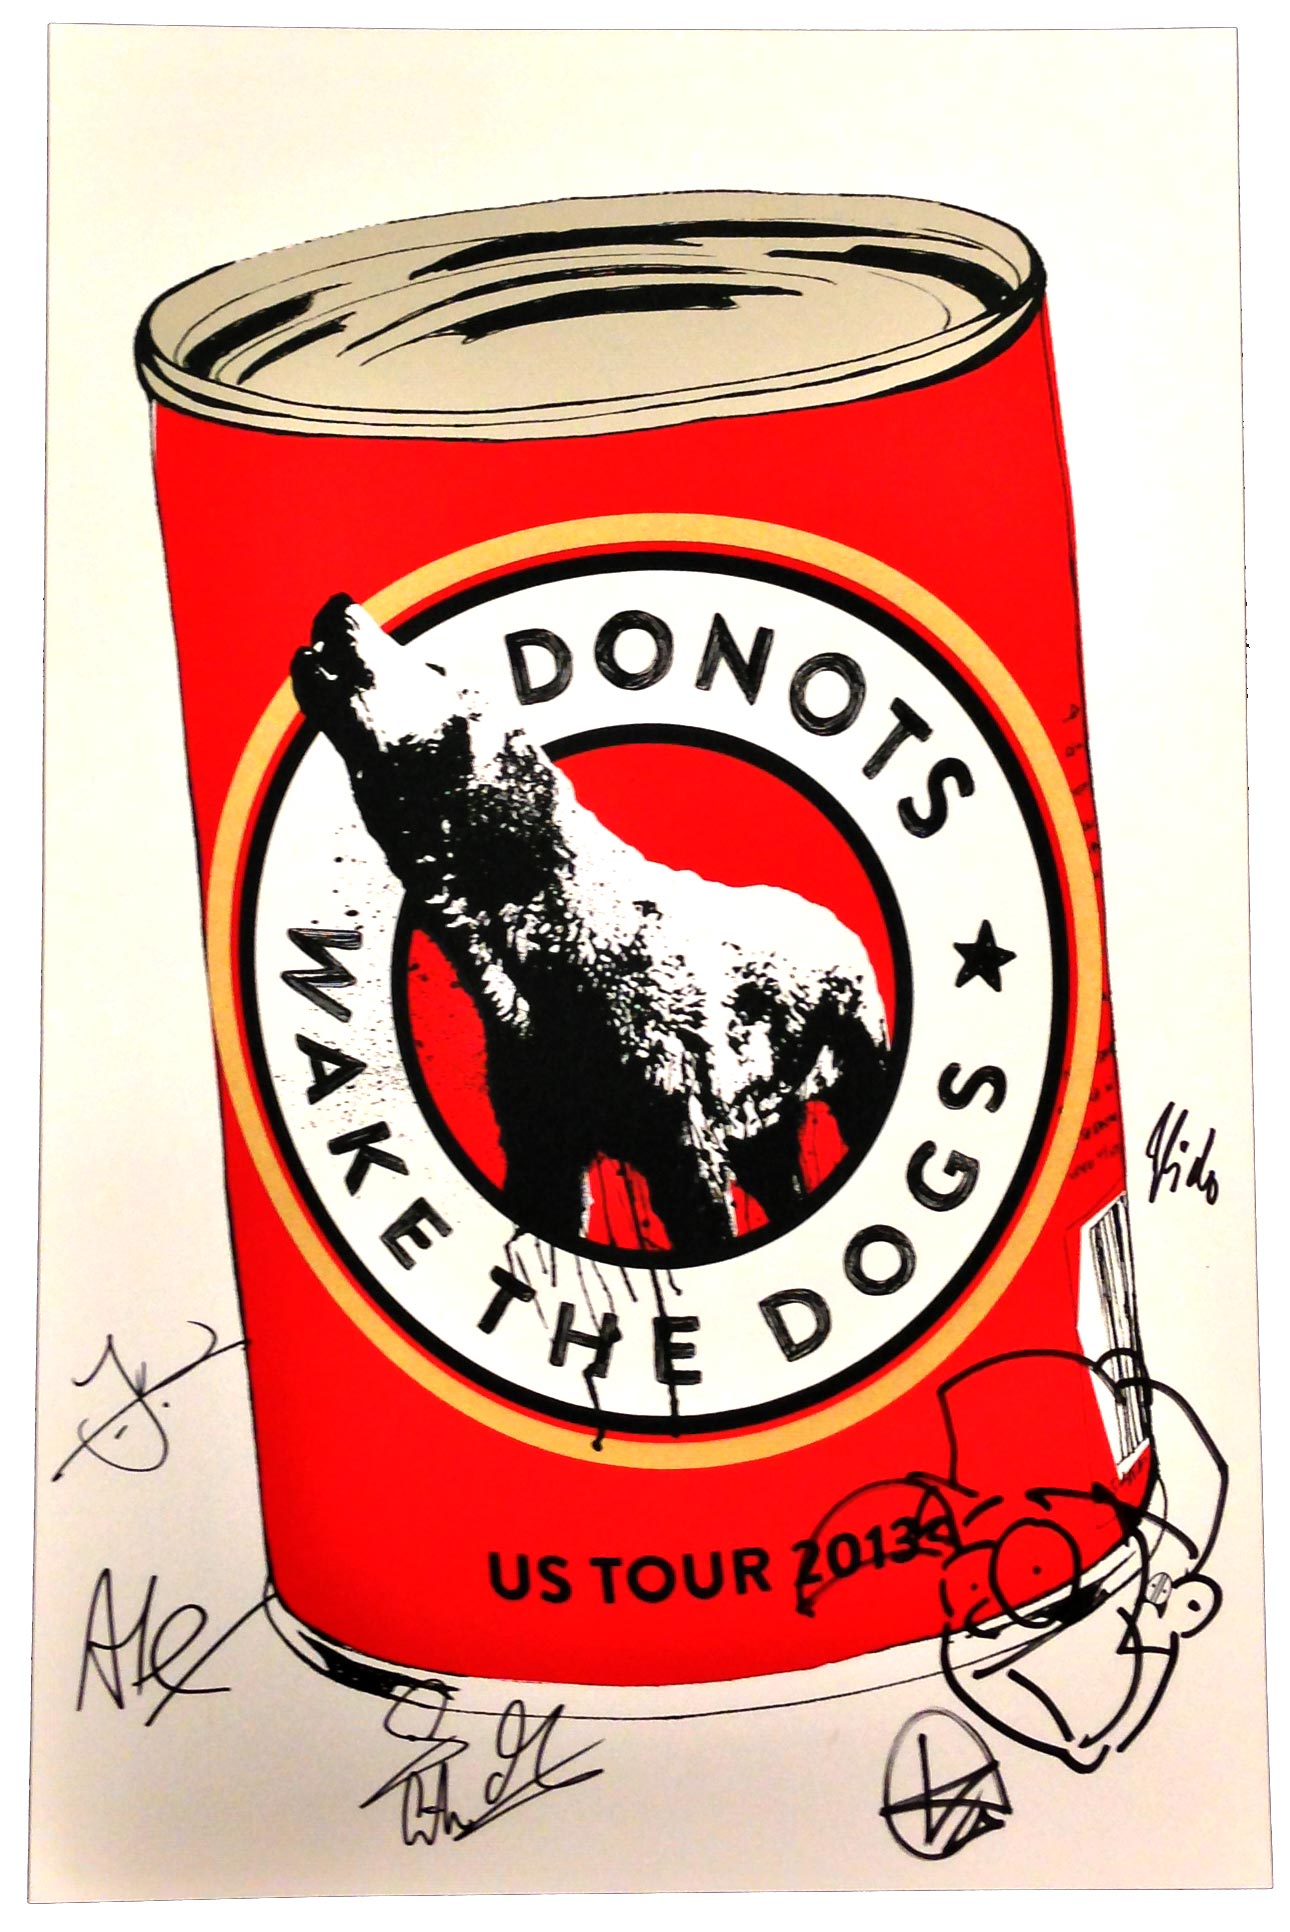 Autographed Donots Limited Edition Screen Printed US Tour Posters